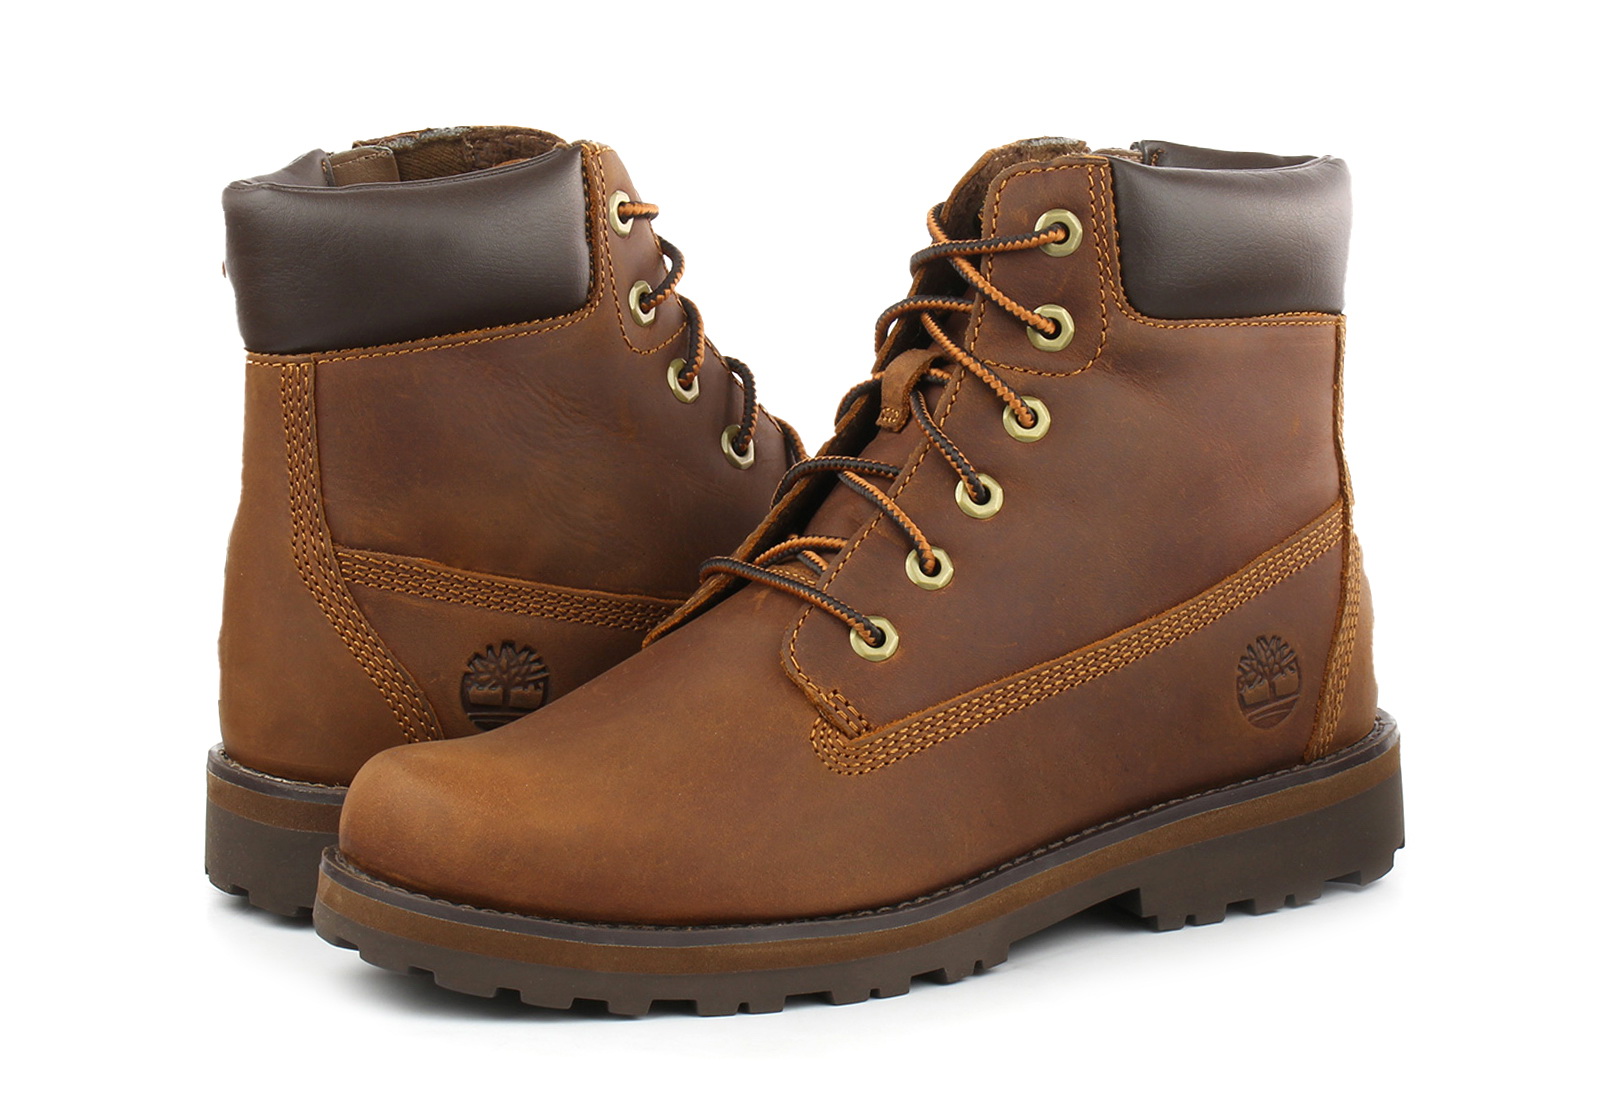 translate purity Cater Timberland Bocanci - Courma Kid 6 In - A28VX-brn - Office Shoes Romania